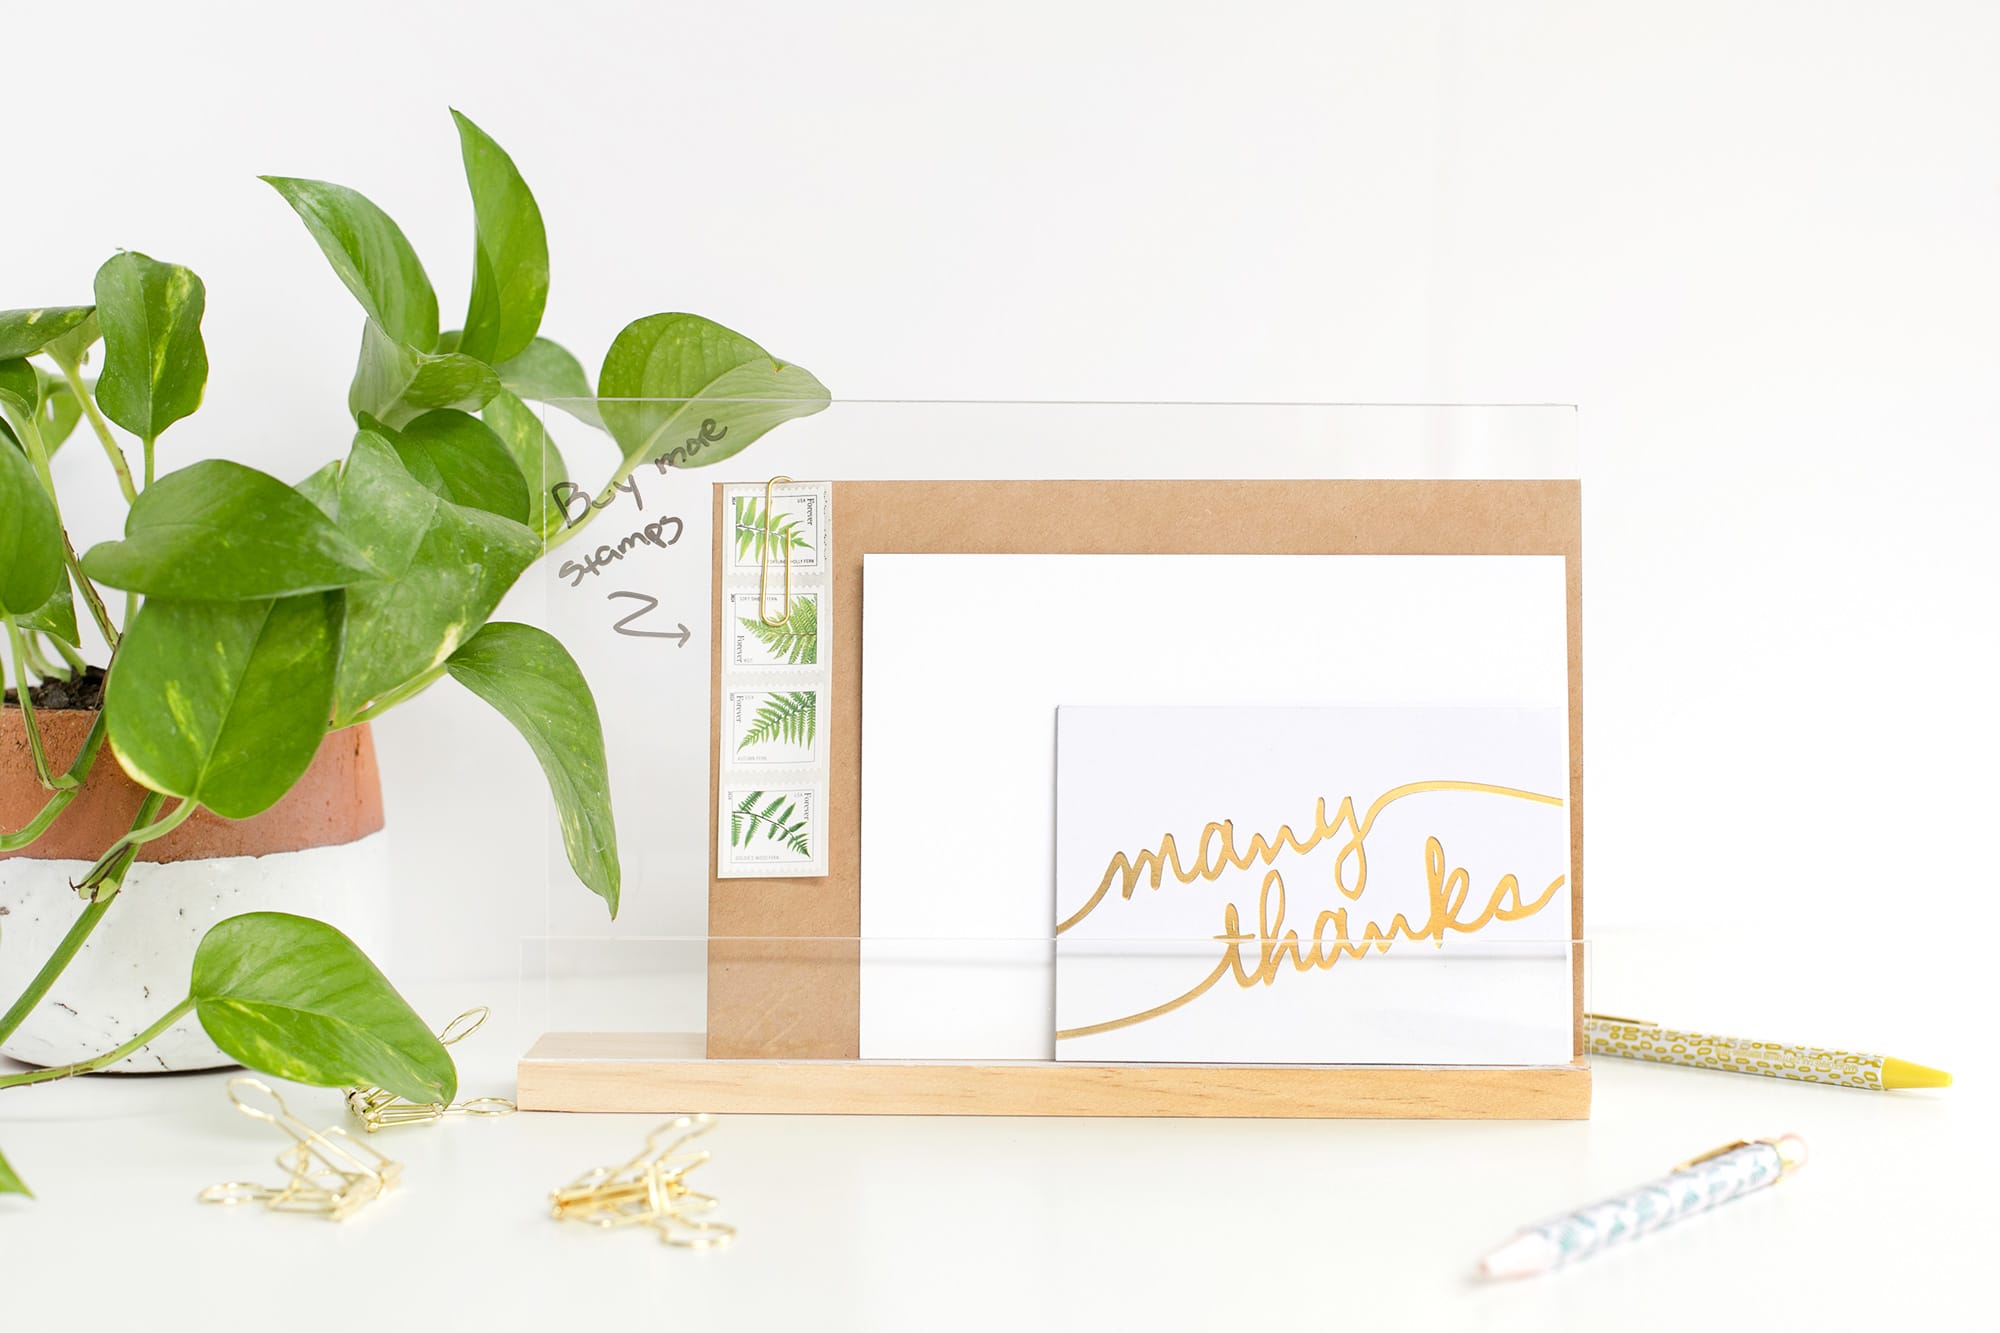 How to Make a Simple $1 DIY Garden Stamp 